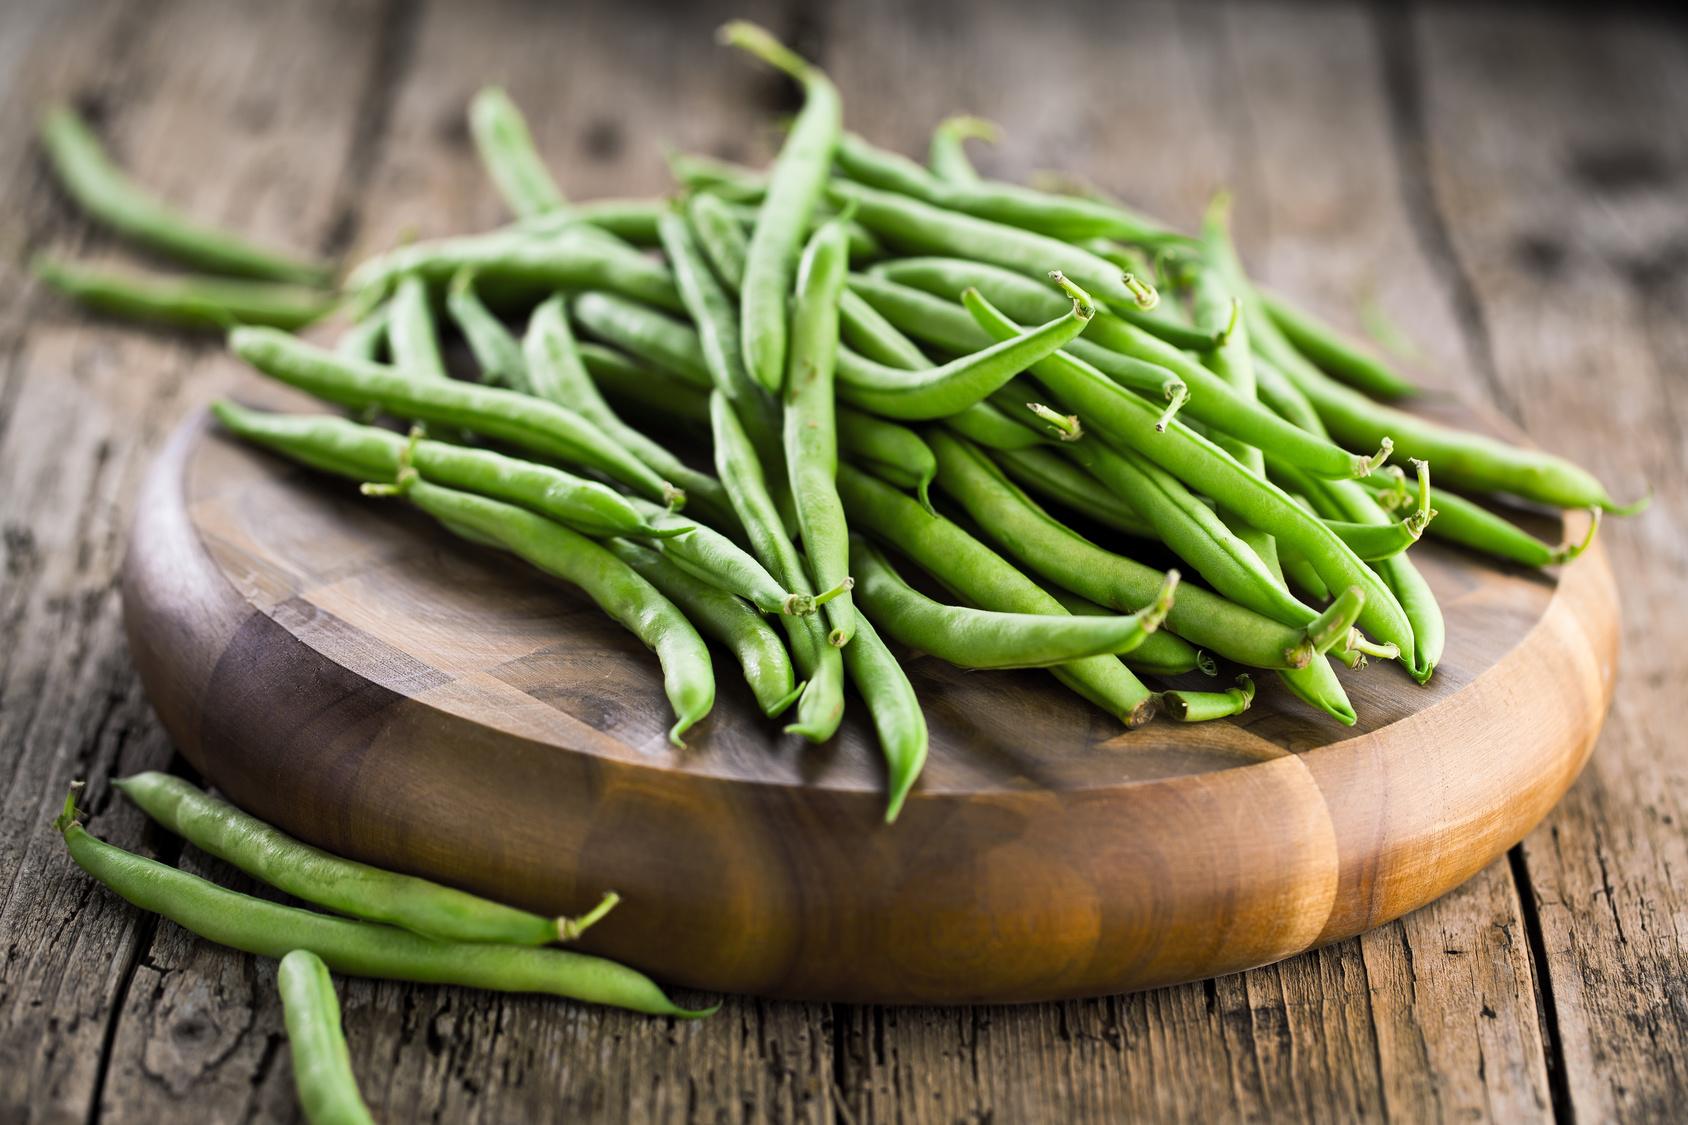 Recettes haricots verts - Cuisine / Madame Figaro